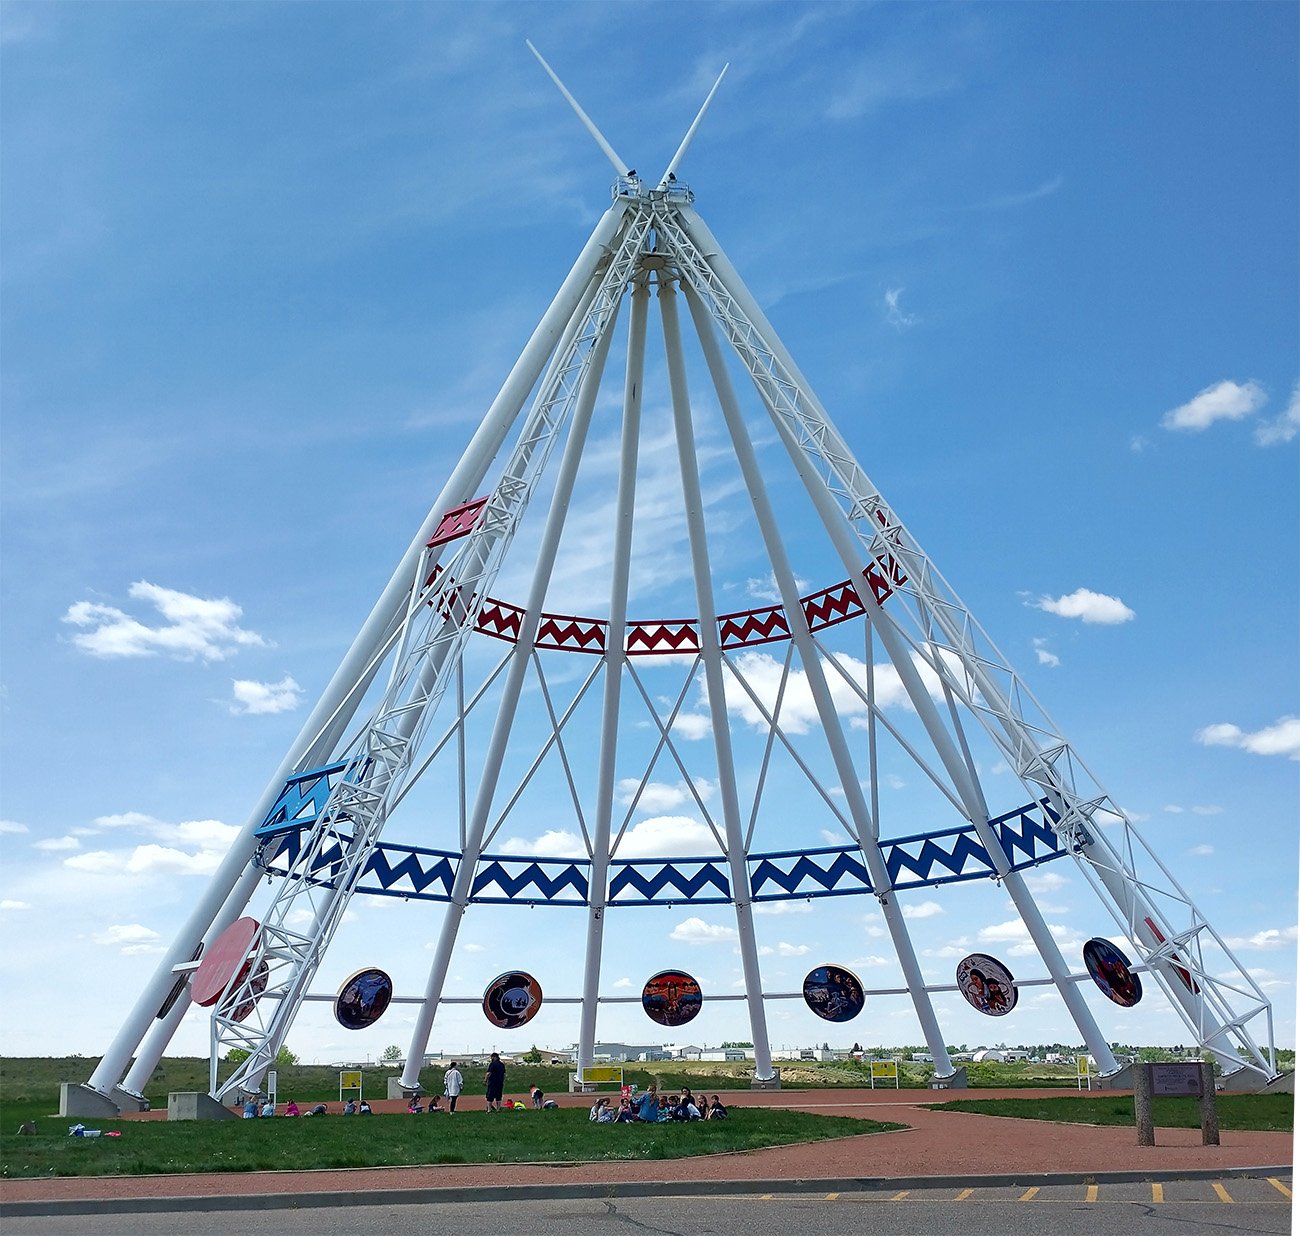 Right before Buffalo Trail you pass through Medicine Hat, where you can view the World's Tallest Teepee!